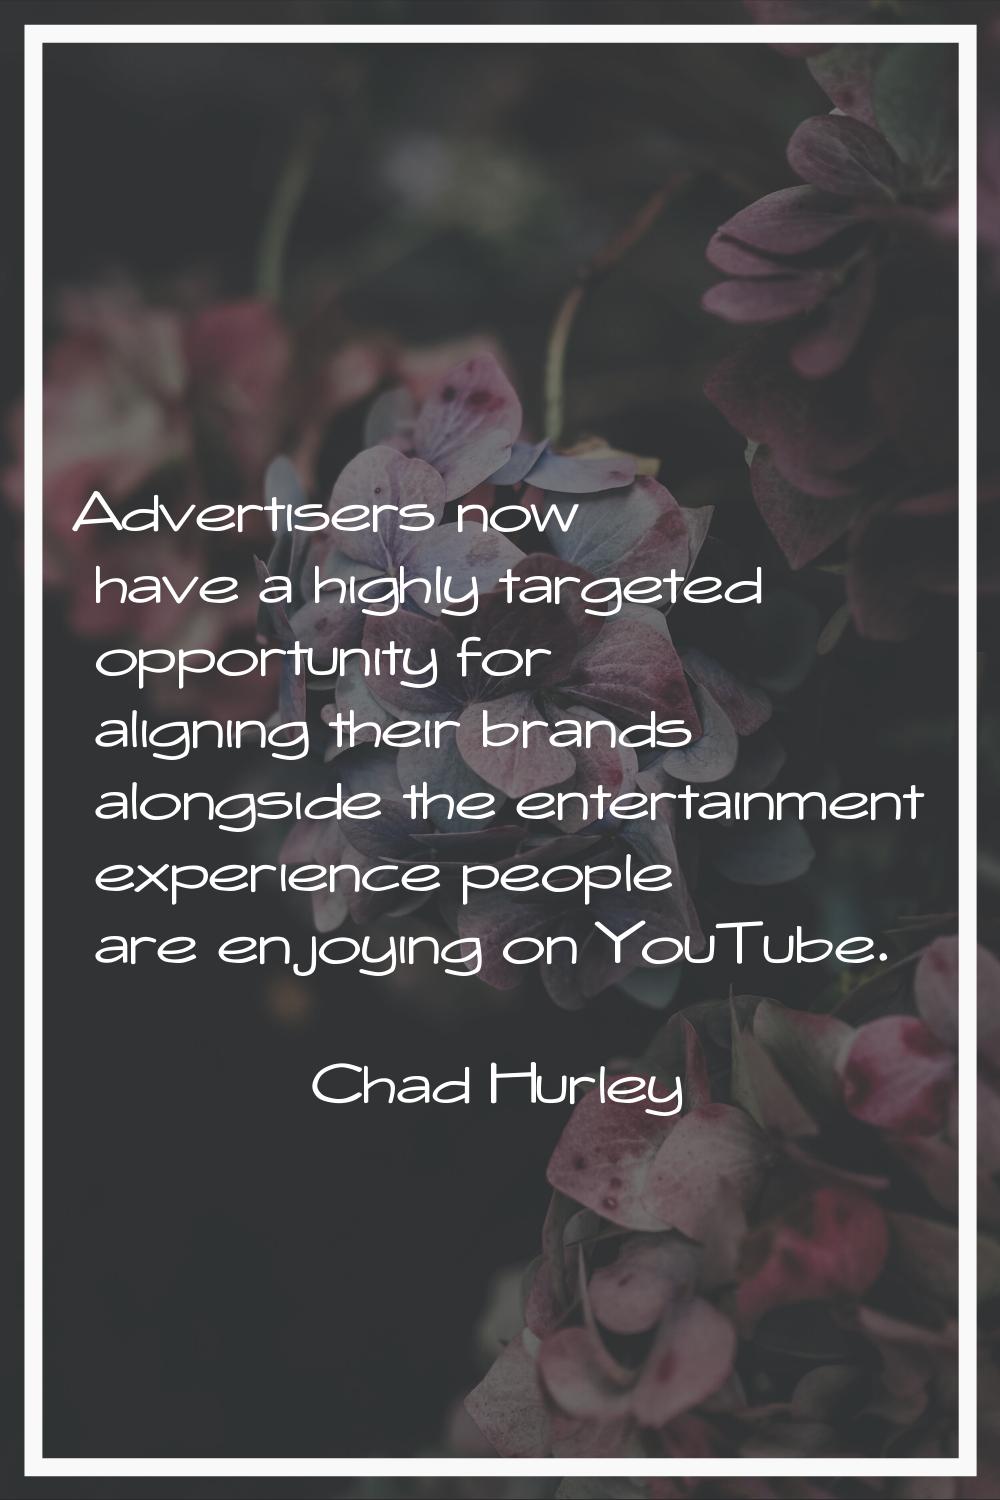 Advertisers now have a highly targeted opportunity for aligning their brands alongside the entertai